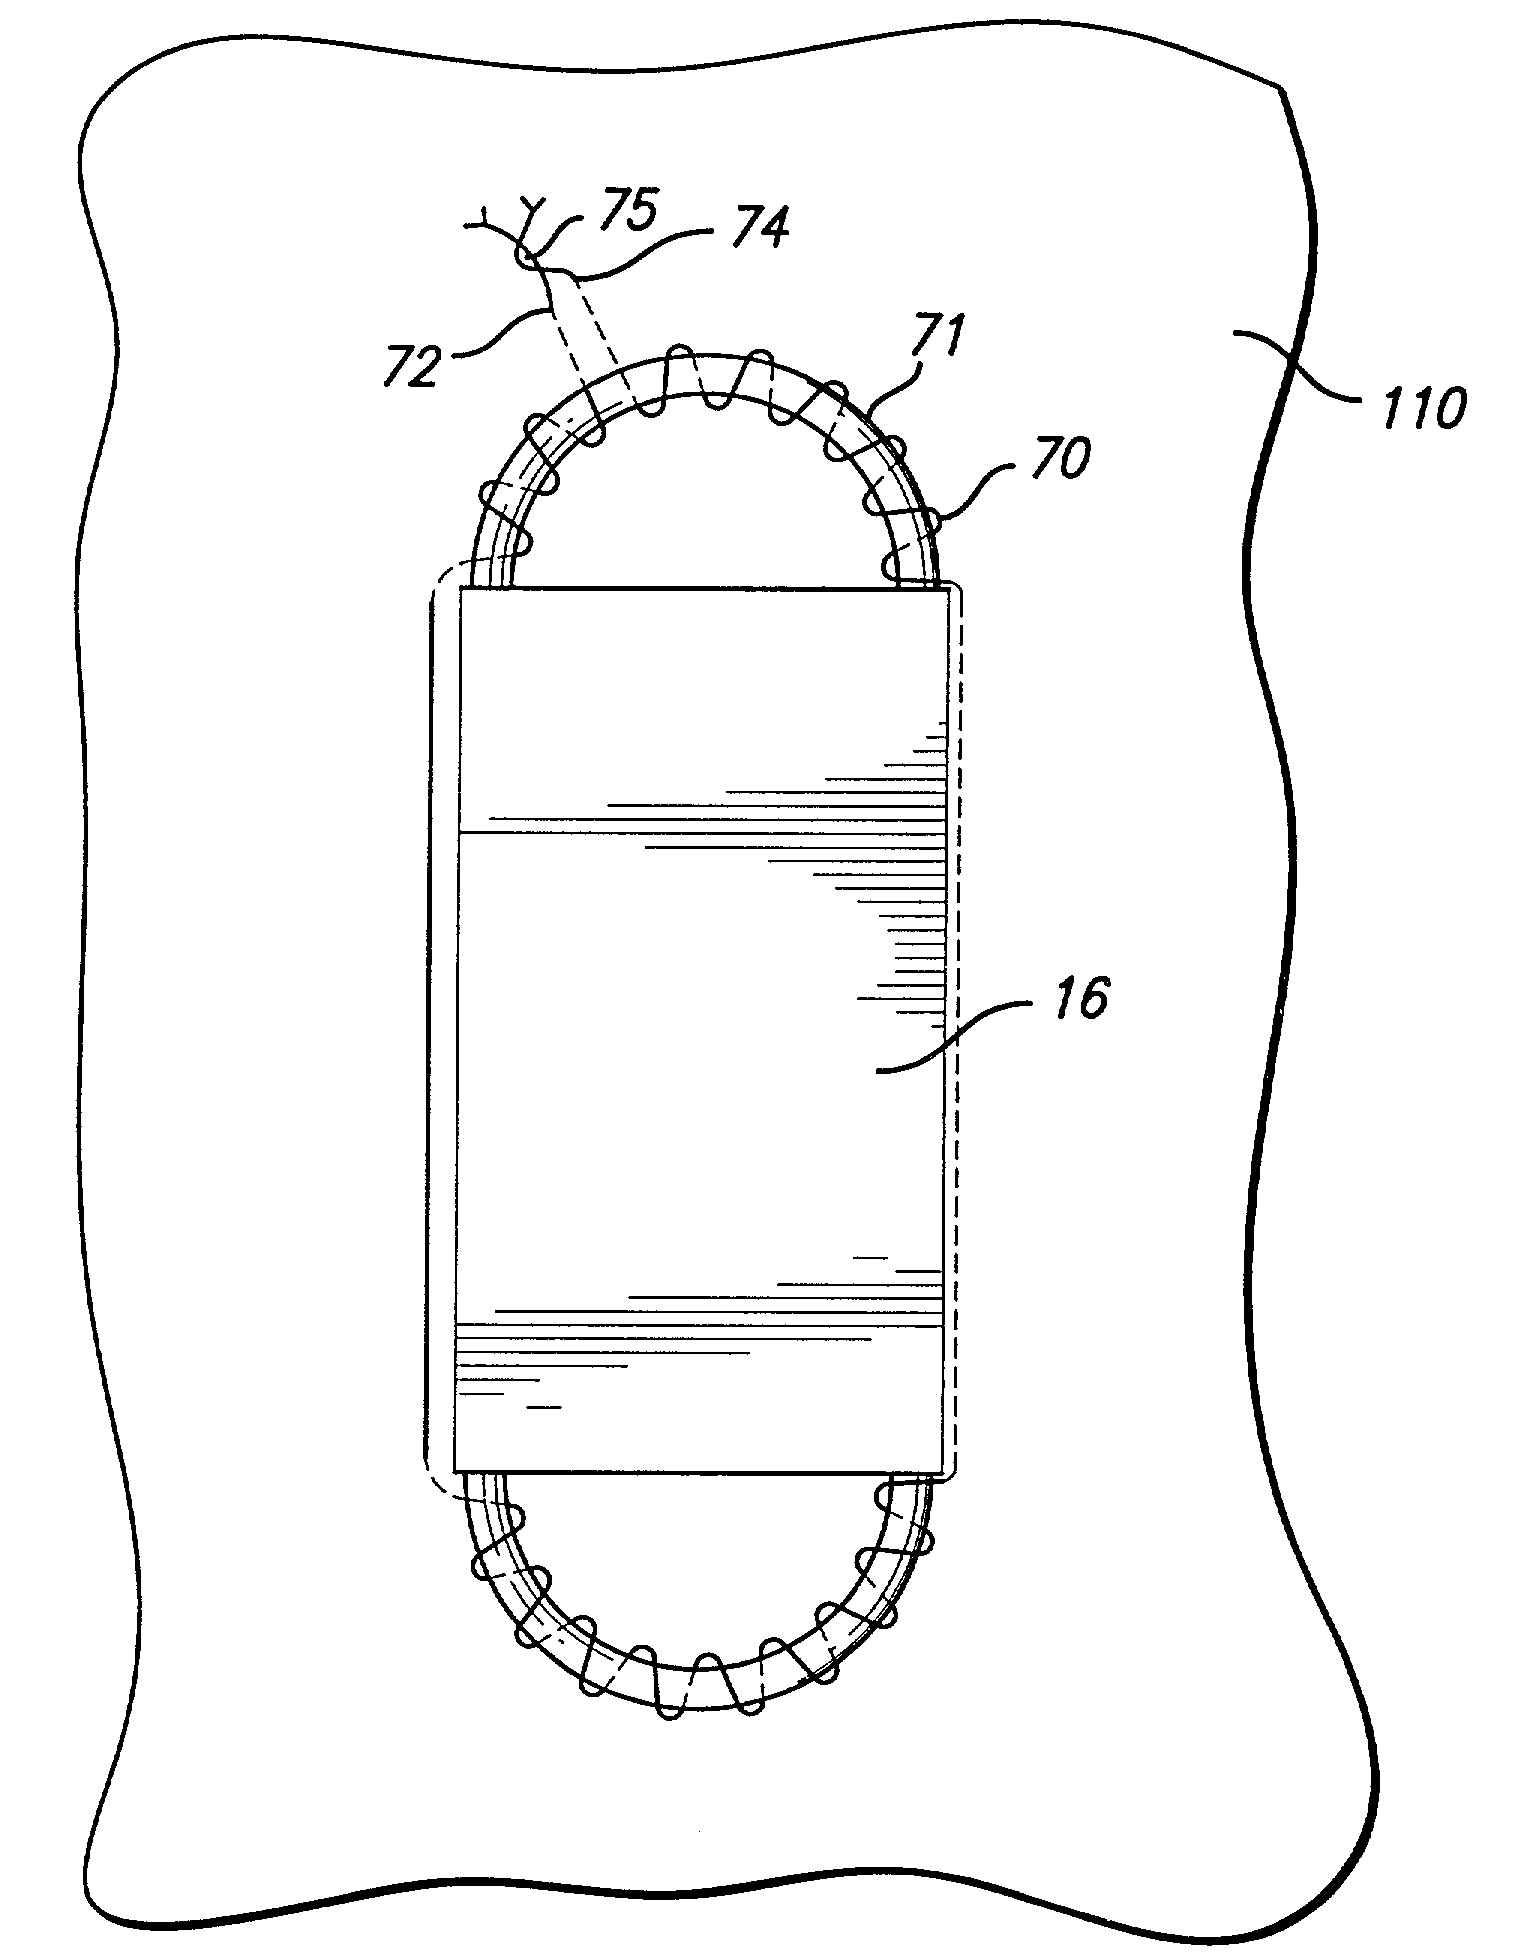 Endovascular graft with sensors design and attachment methods